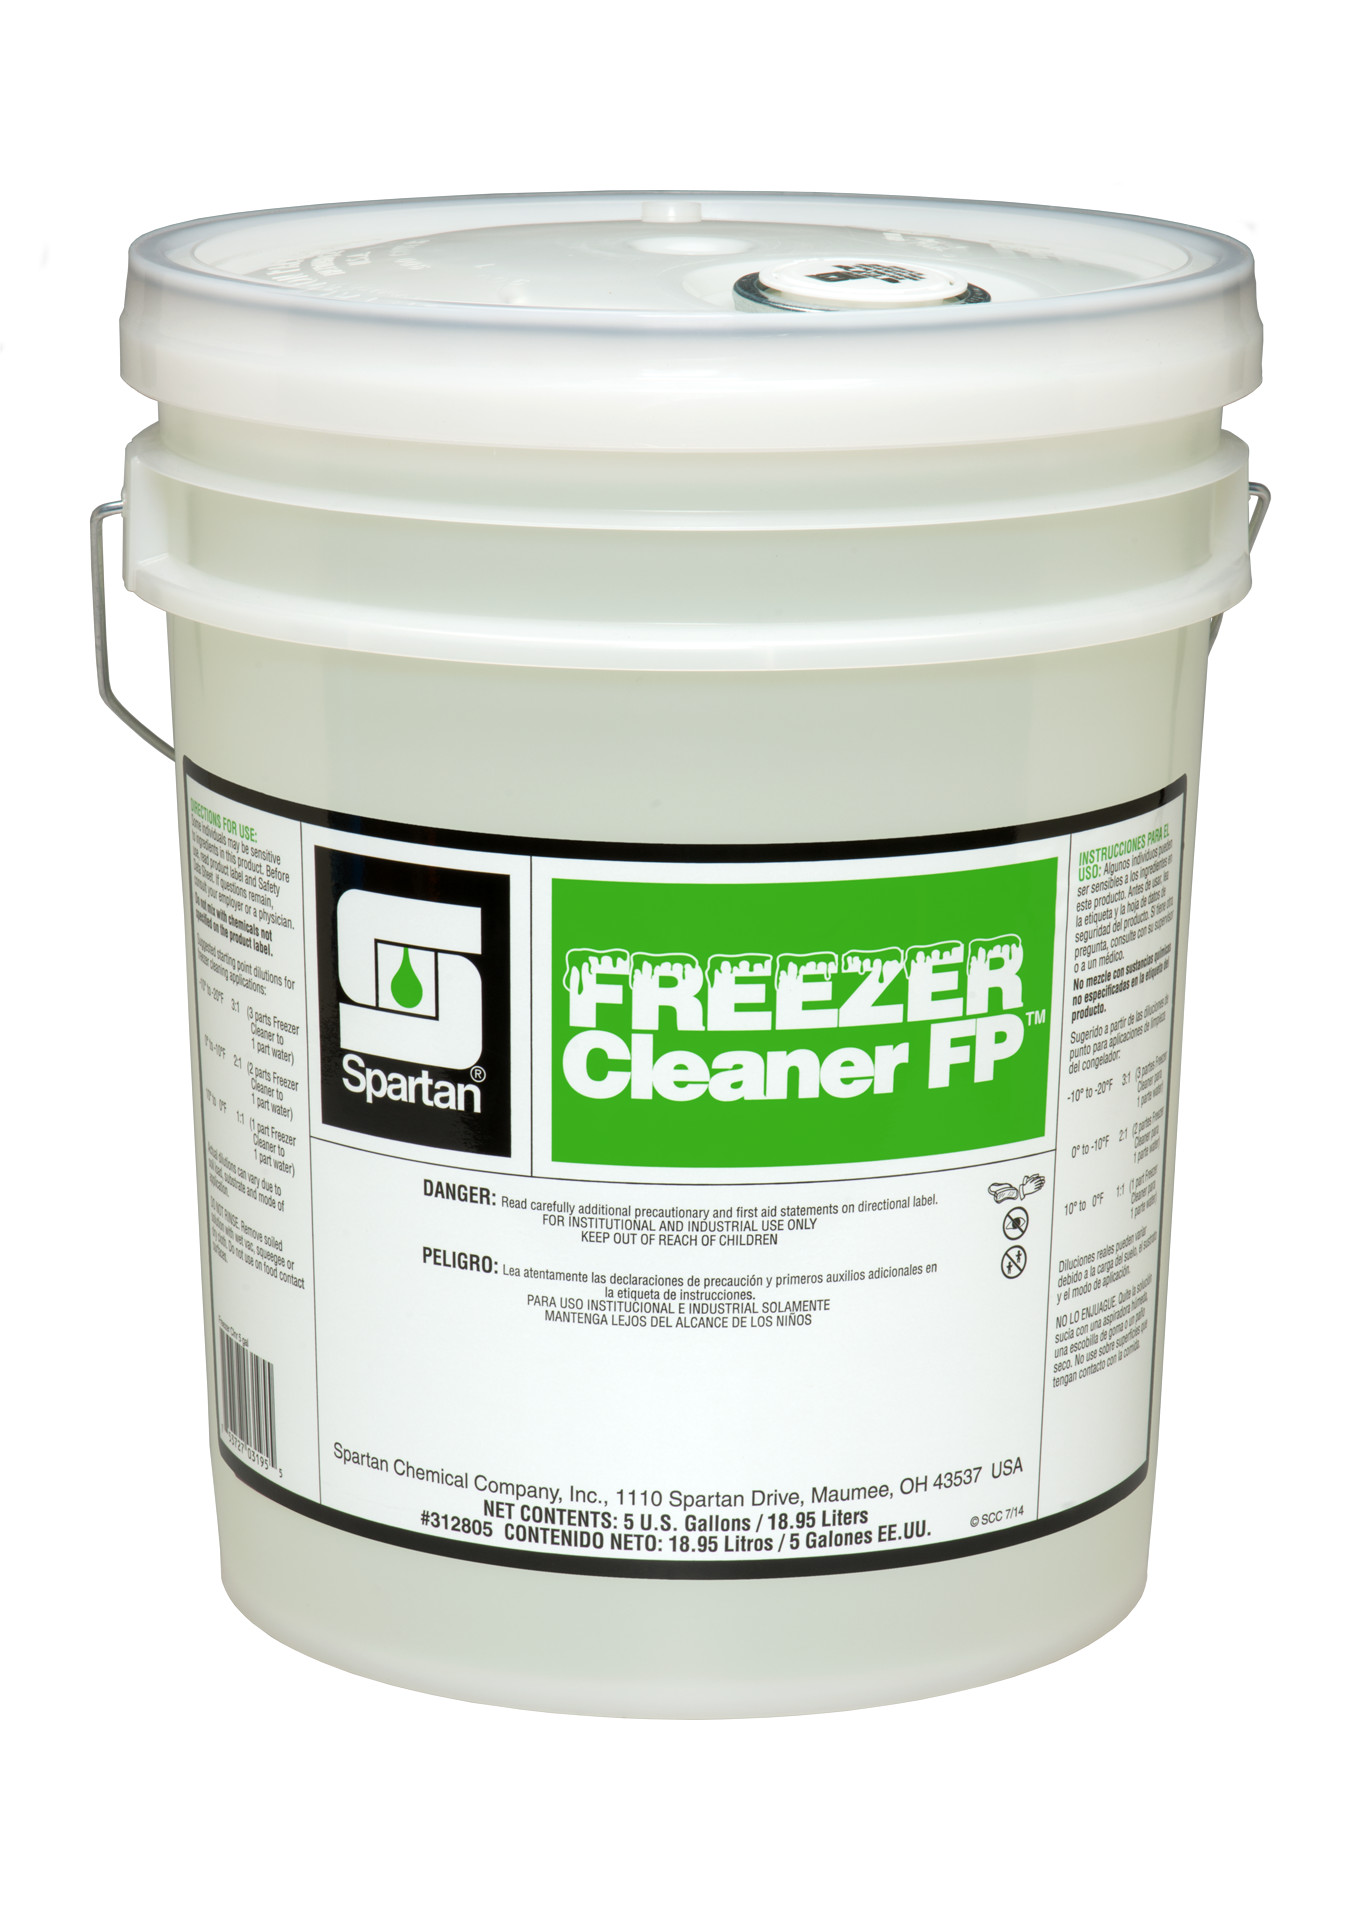 Spartan Chemical Company Freezer Cleaner FP, 5 GAL PAIL